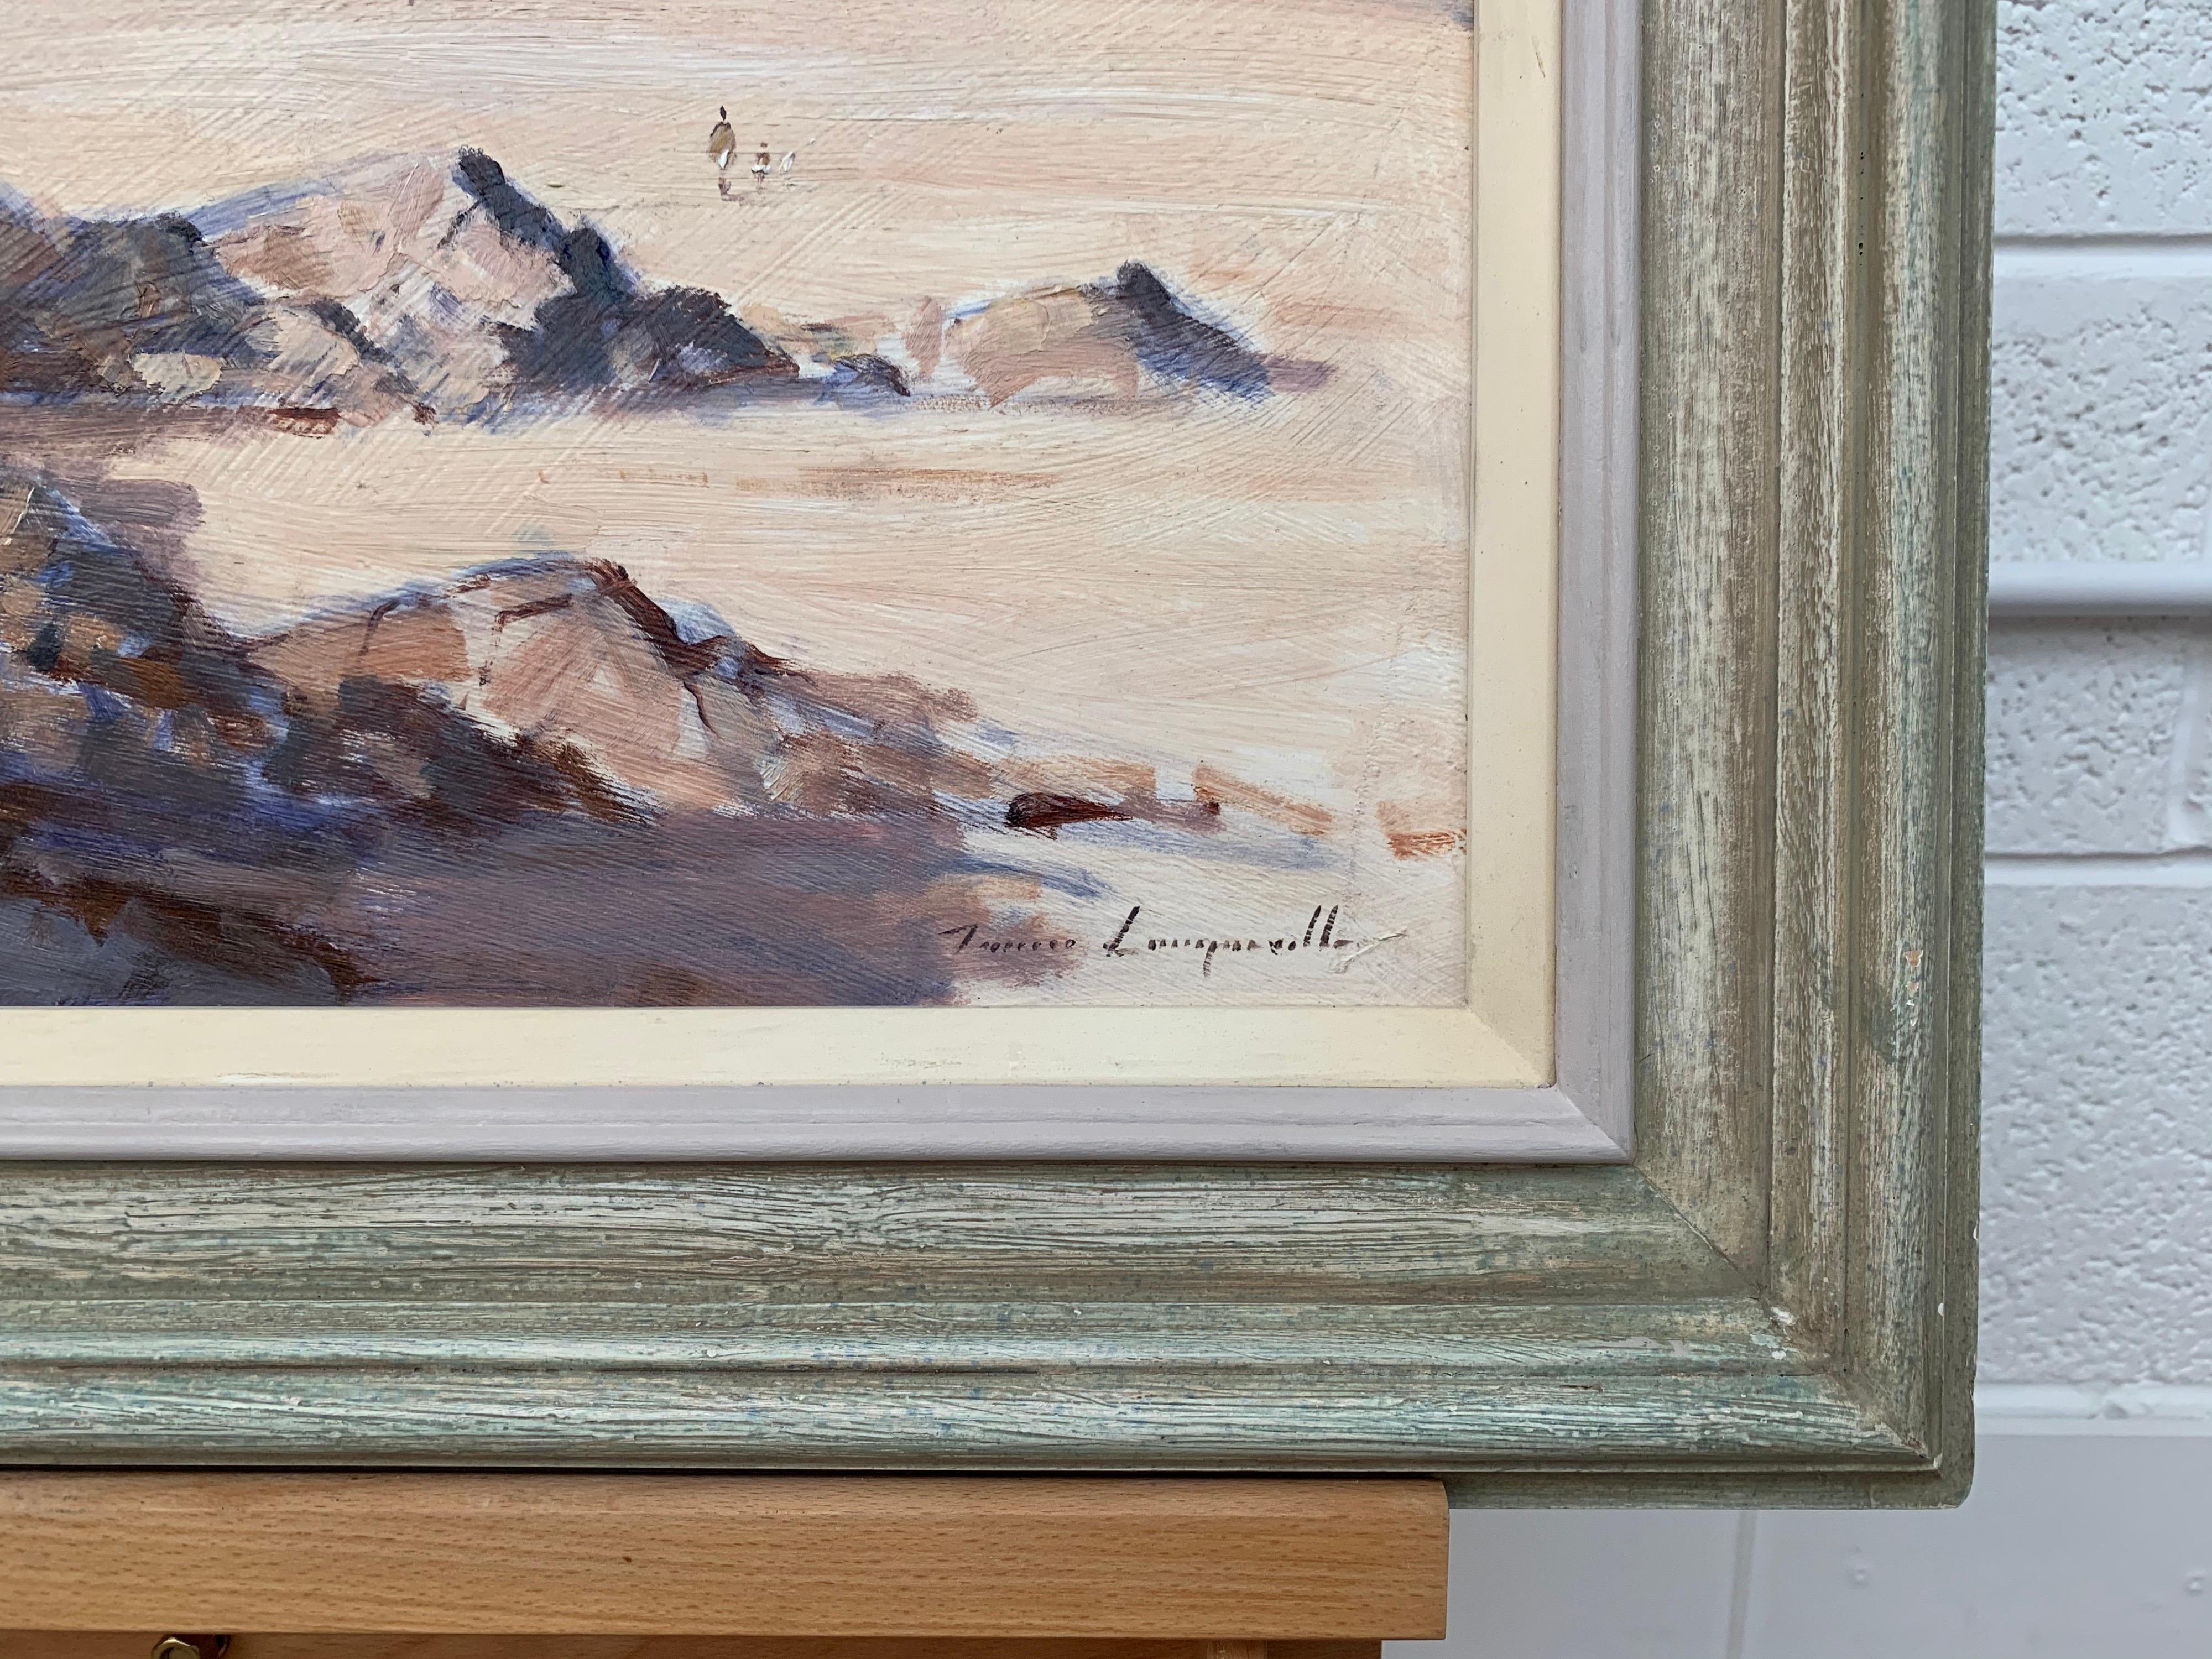 Landscape Seascape Painting of The Little Bay in Jersey by Artist James Longueville PS PBSA (British Northern School)
Oil on board, signed bottom left, framed in a high quality gold moulding

Art measures 20 x 12 inches
Frame measures 25 x 17